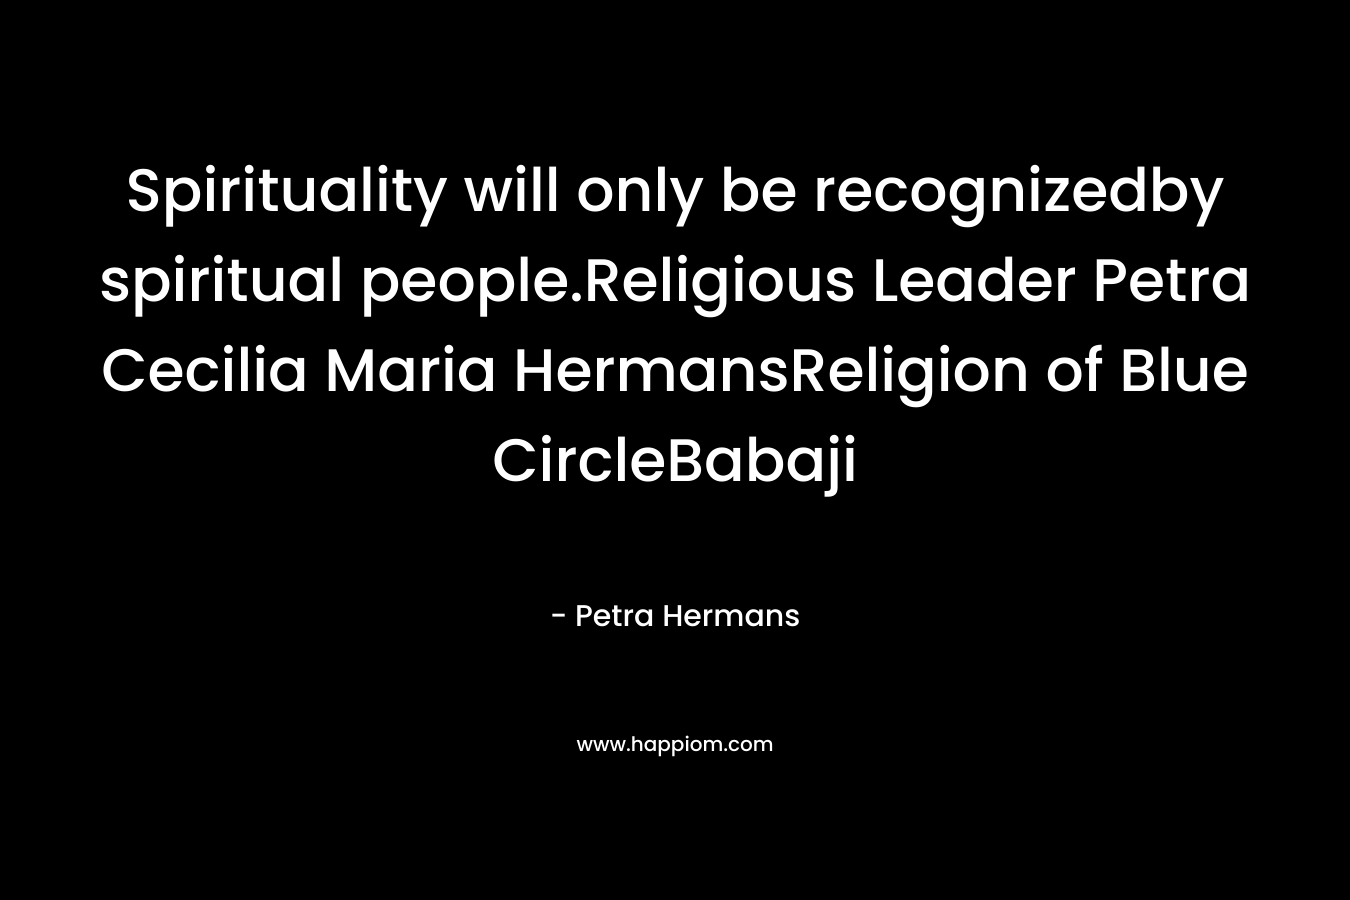 Spirituality will only be recognizedby spiritual people.Religious Leader Petra Cecilia Maria HermansReligion of Blue CircleBabaji – Petra Hermans